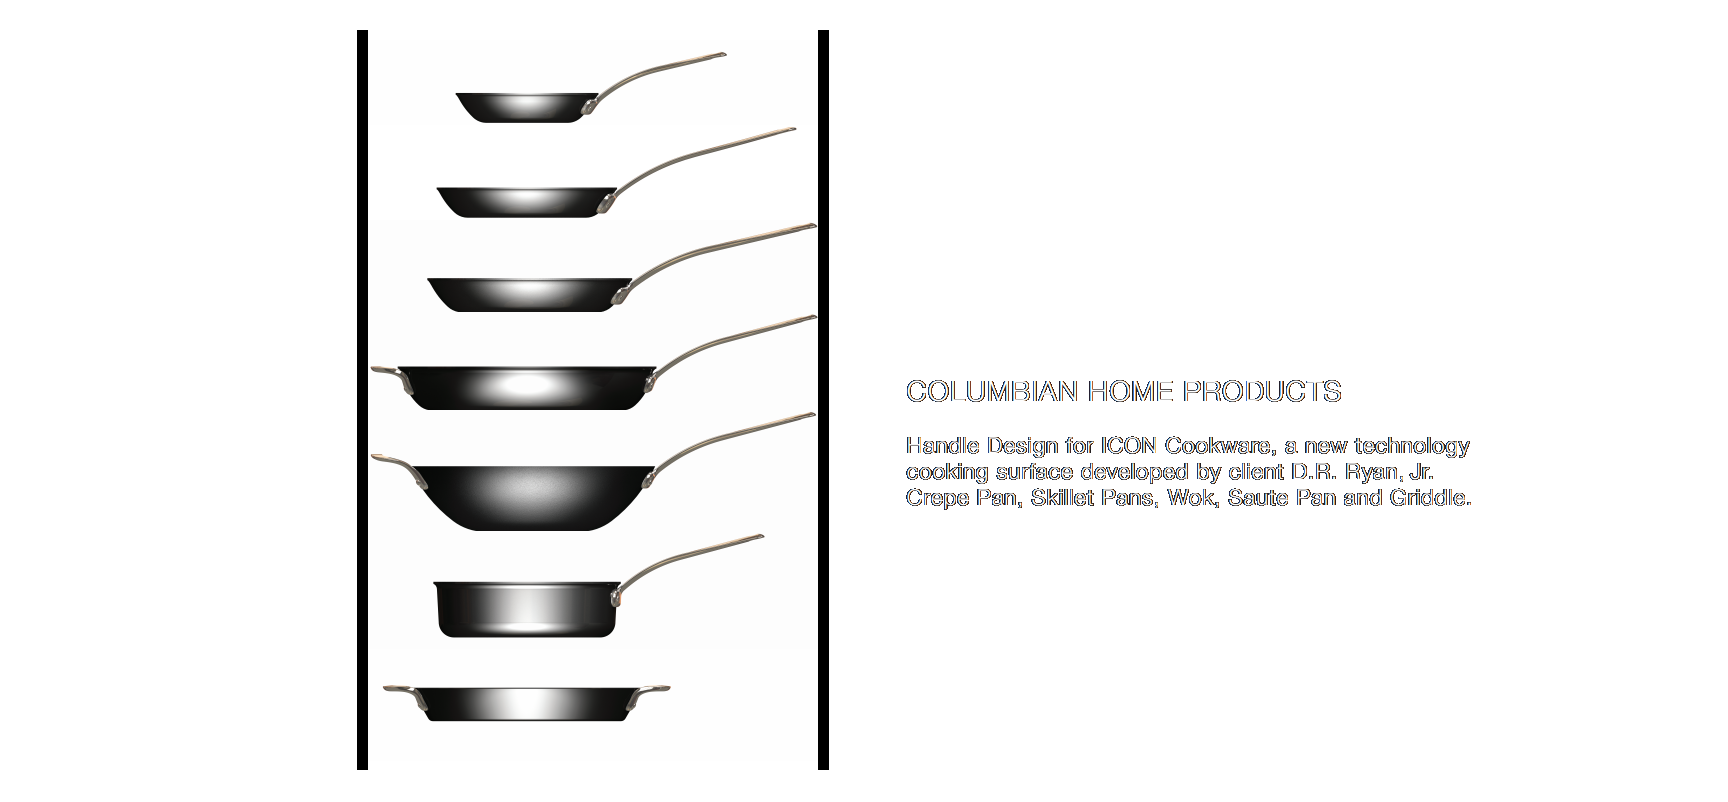 Columbian Home Products